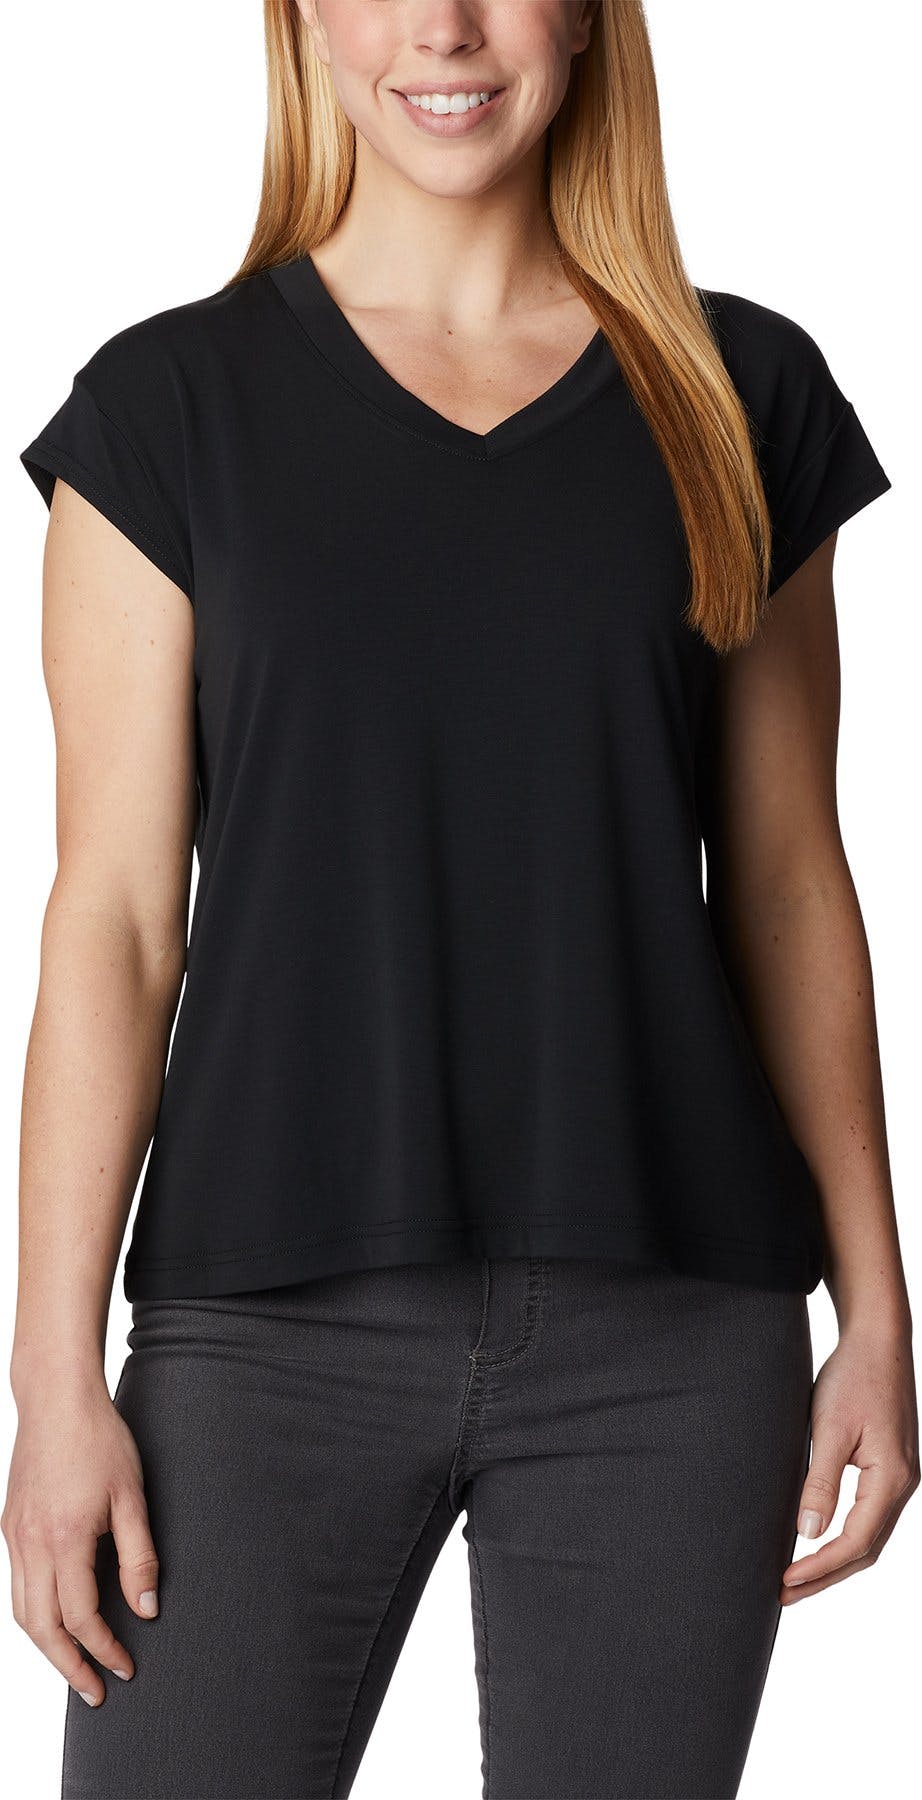 Product image for Boundless Beauty Short Sleeve Tee - Women's